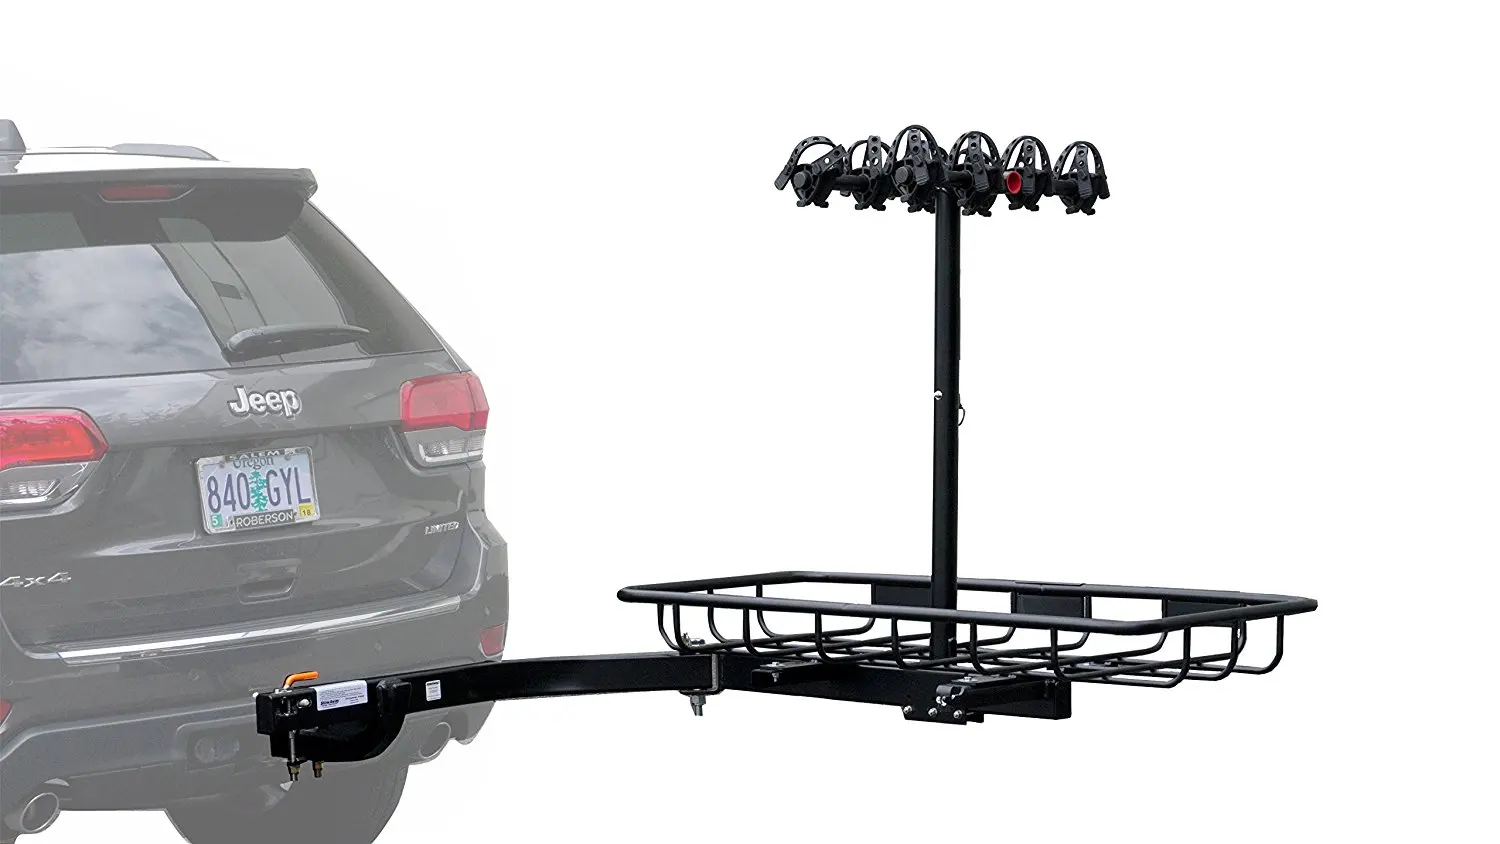 Buy StowAway Max Cargo Carrier with a Swing Away Frame in Cheap Price on Alibaba.com Stowaway Carriers Max Cargo Box Swing Away Frame